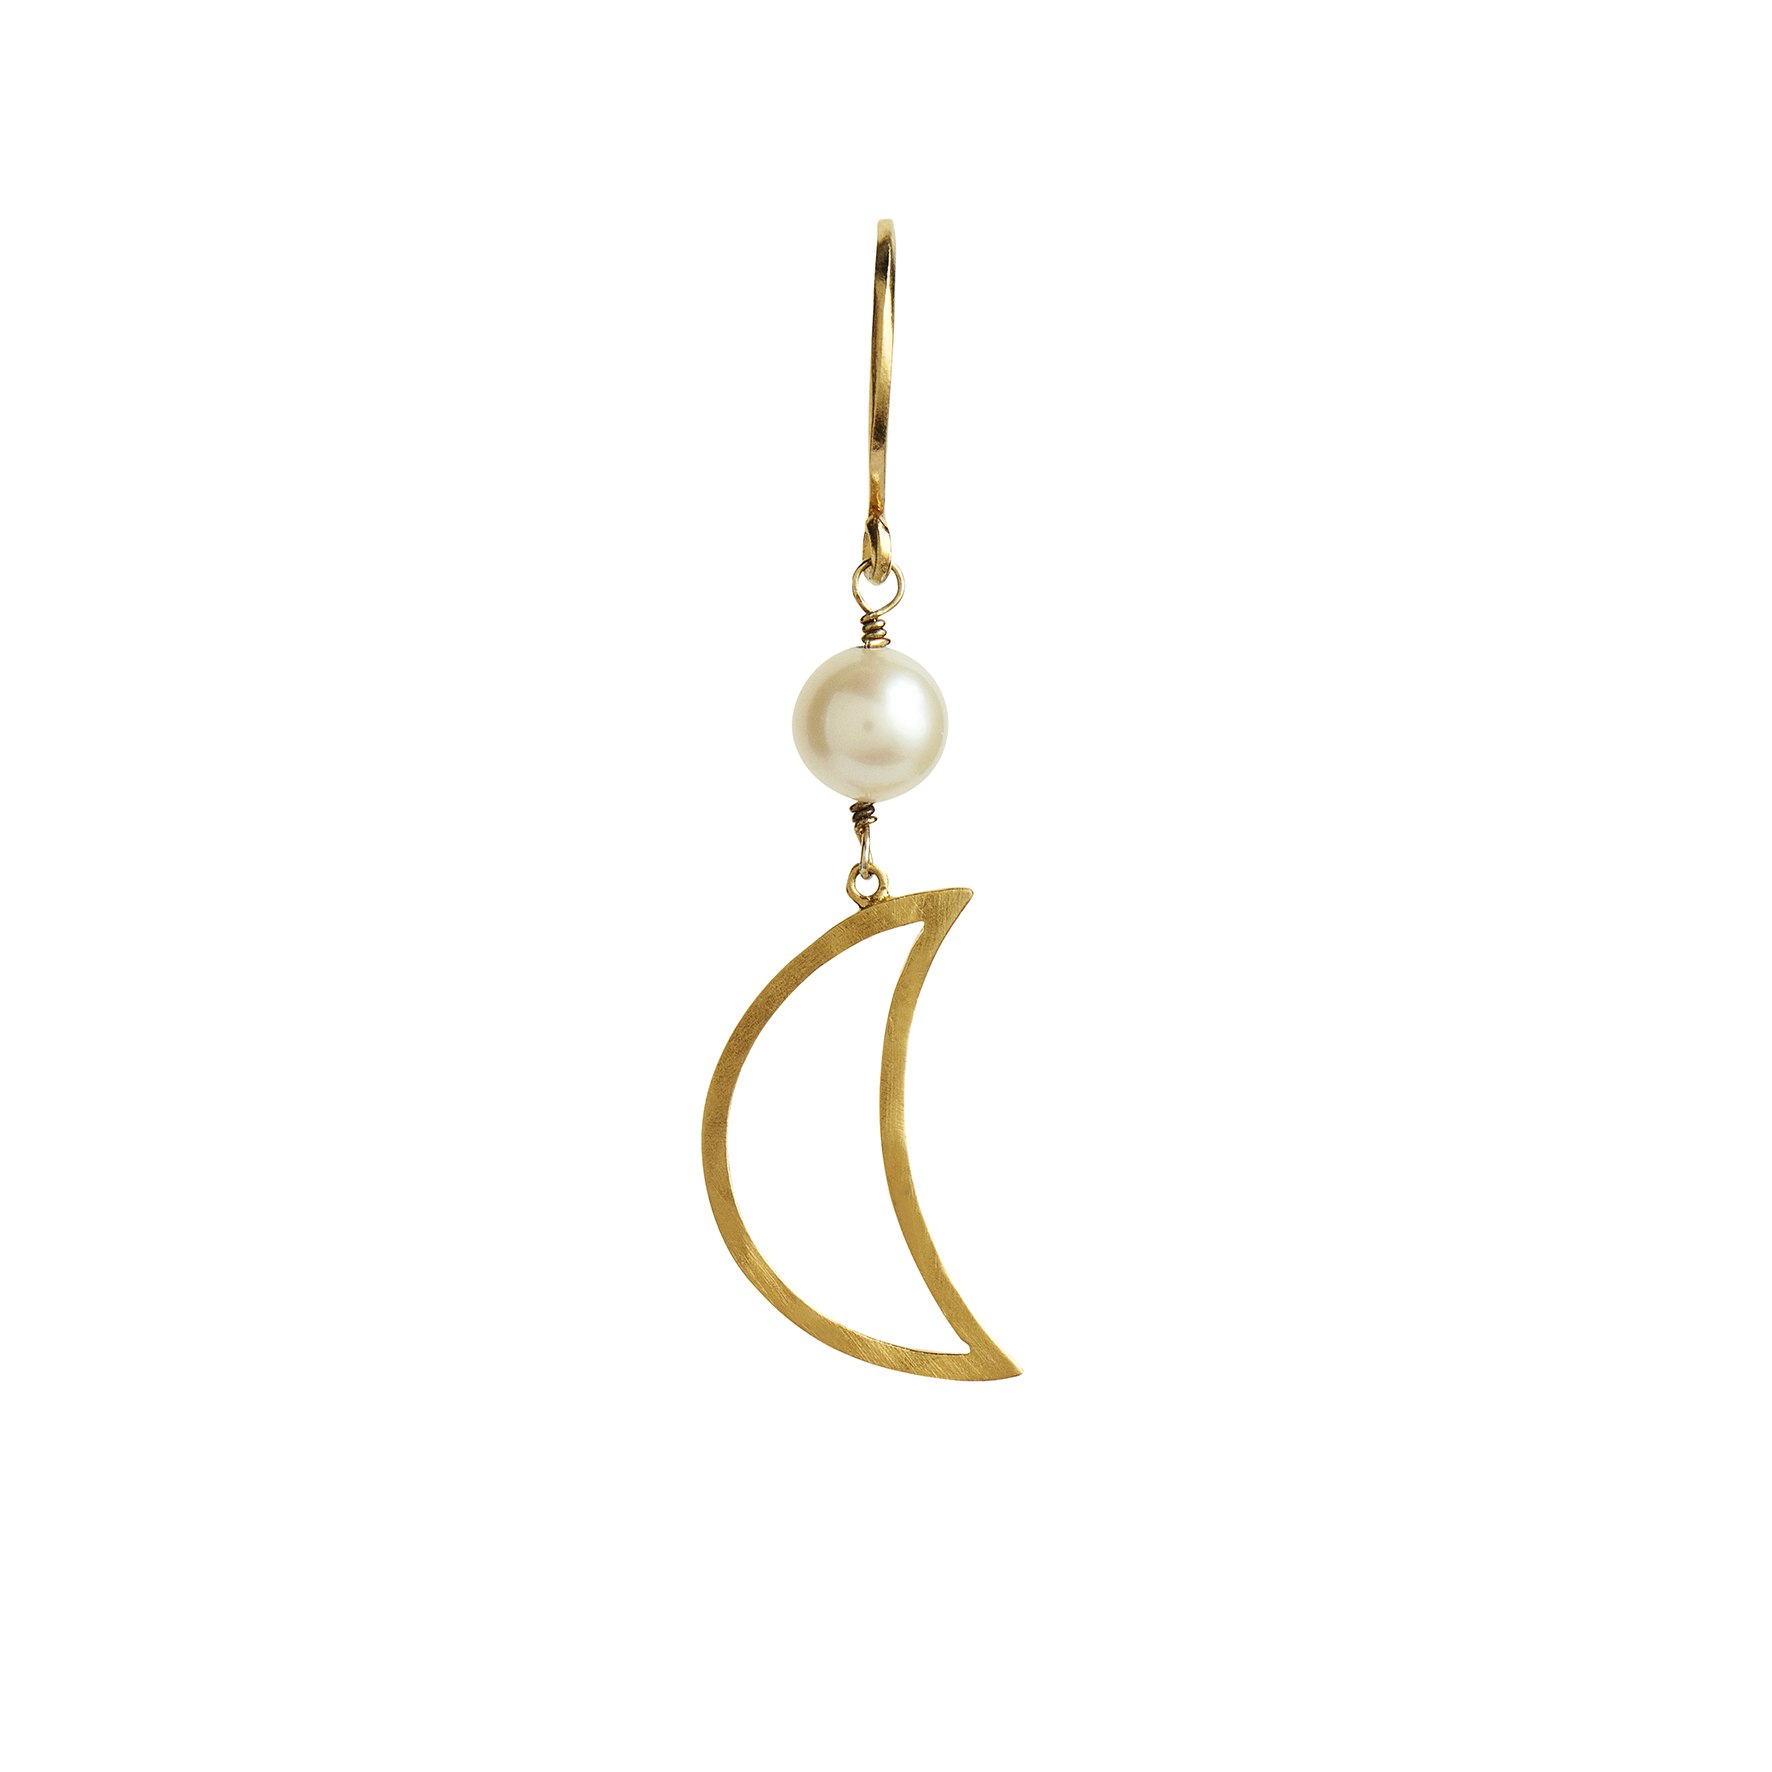 Bella Moon Earring With Pearl from STINE A Jewelry in Goldplated Silver Sterling 925